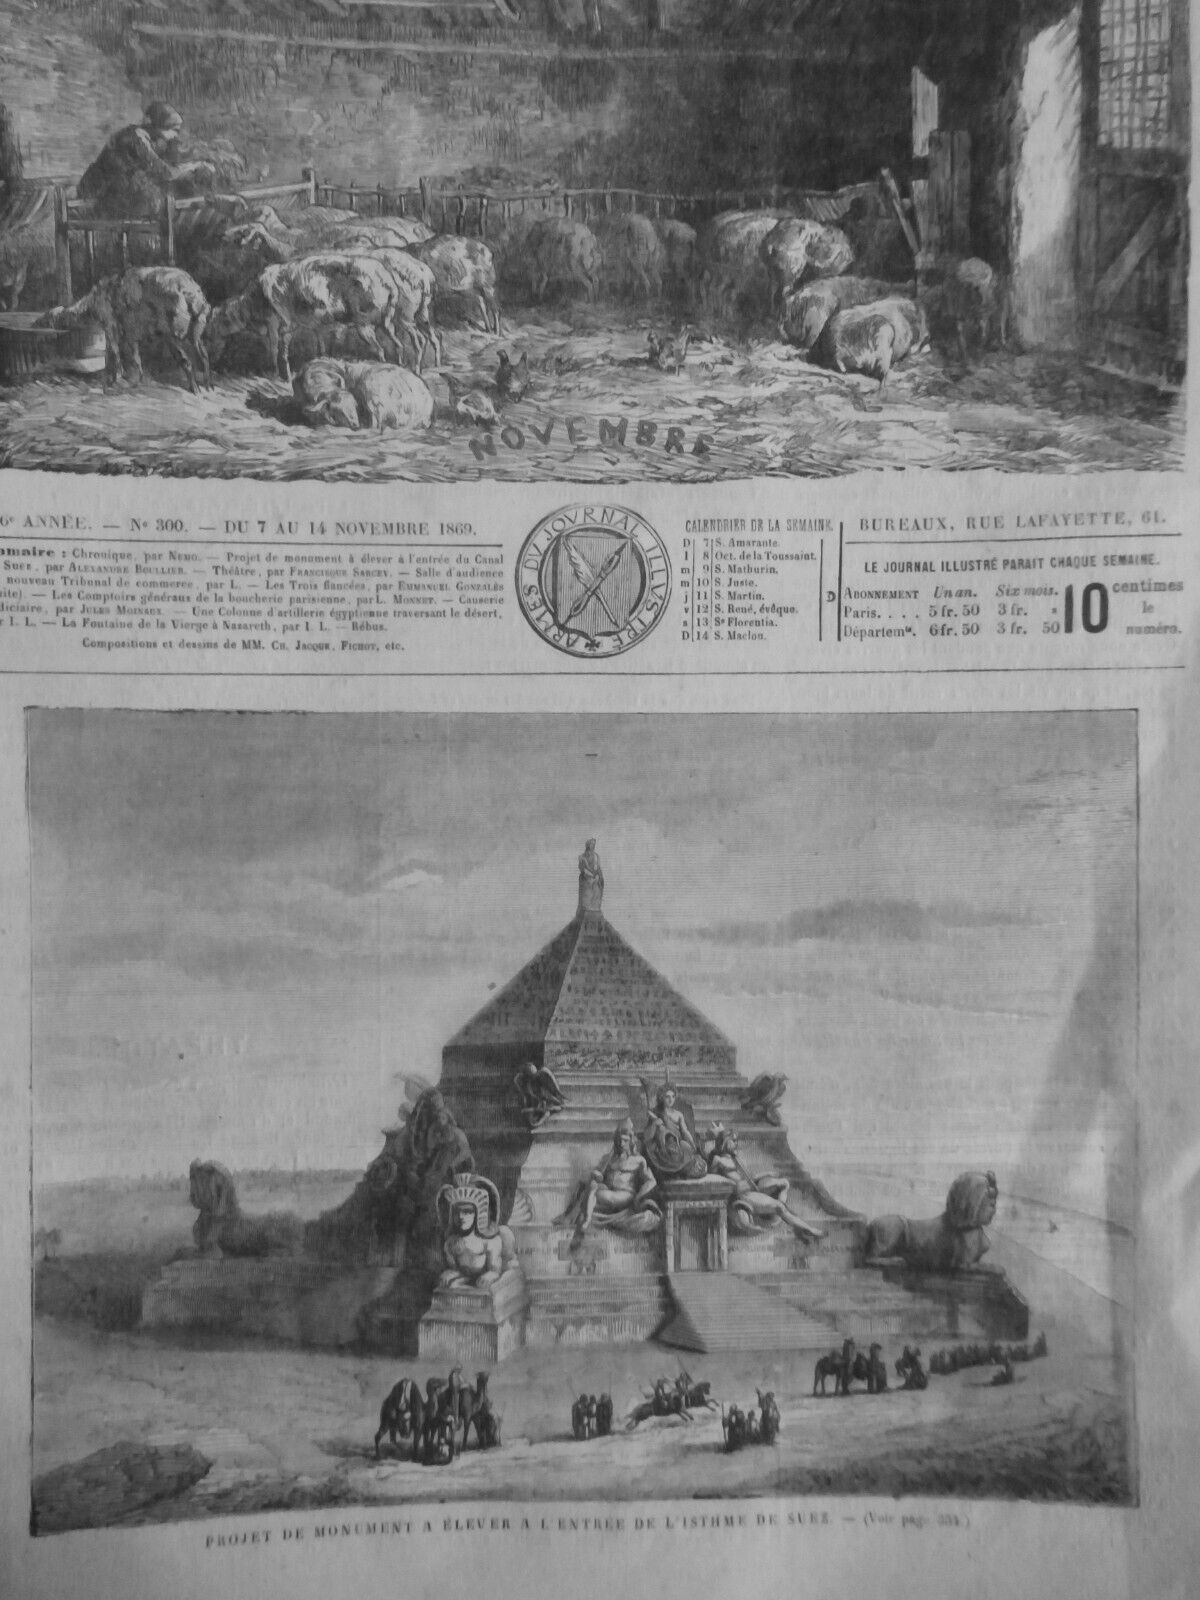 1953 1869 Egypt Channel Isthmus Of Suez Chioce Temple Pharaoh 18 Newspapers Loca